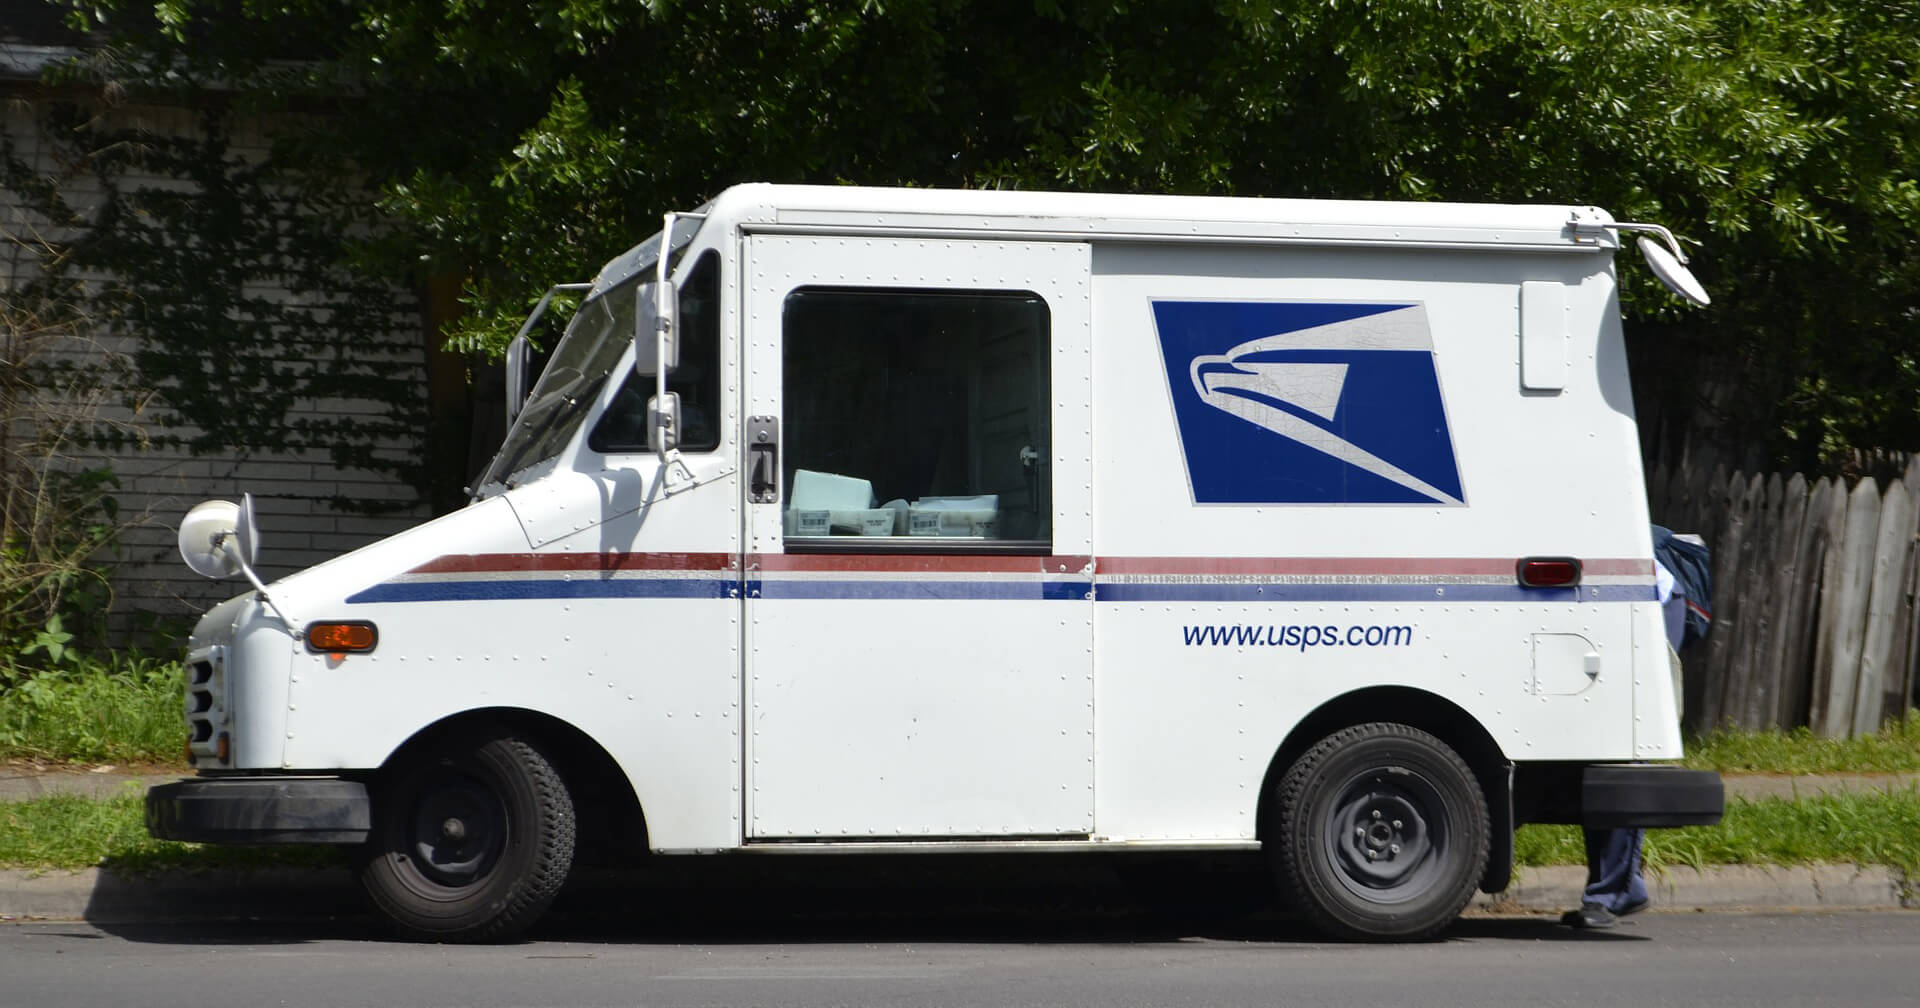 How to schedule a free USPS Pickup